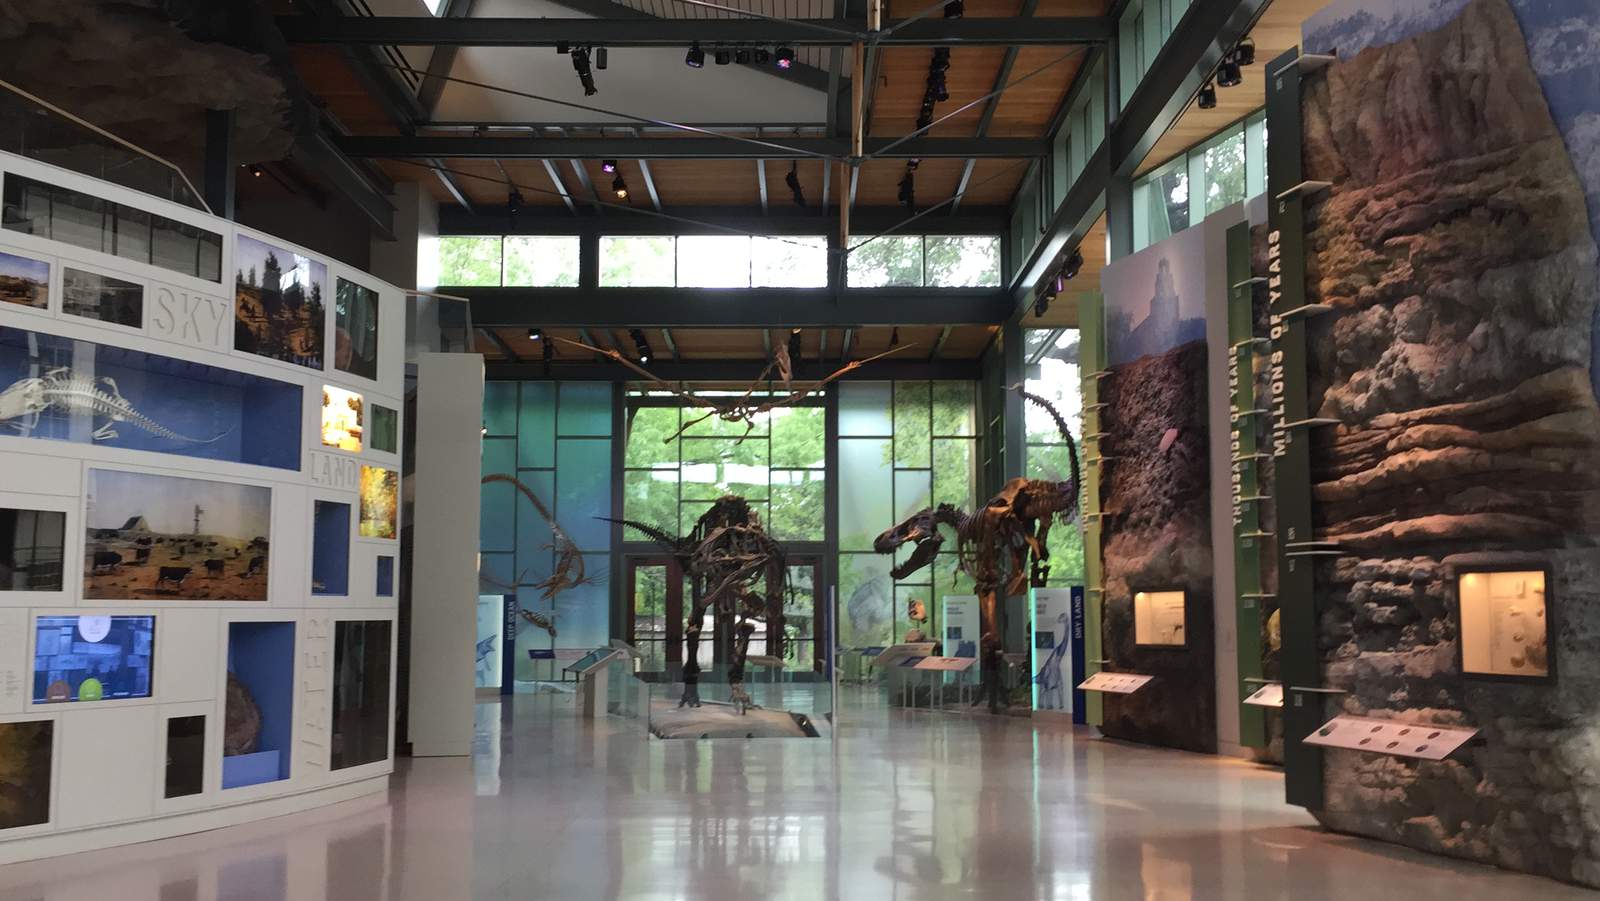 Witte Museum reopens July 1 with added safety protocols for guests